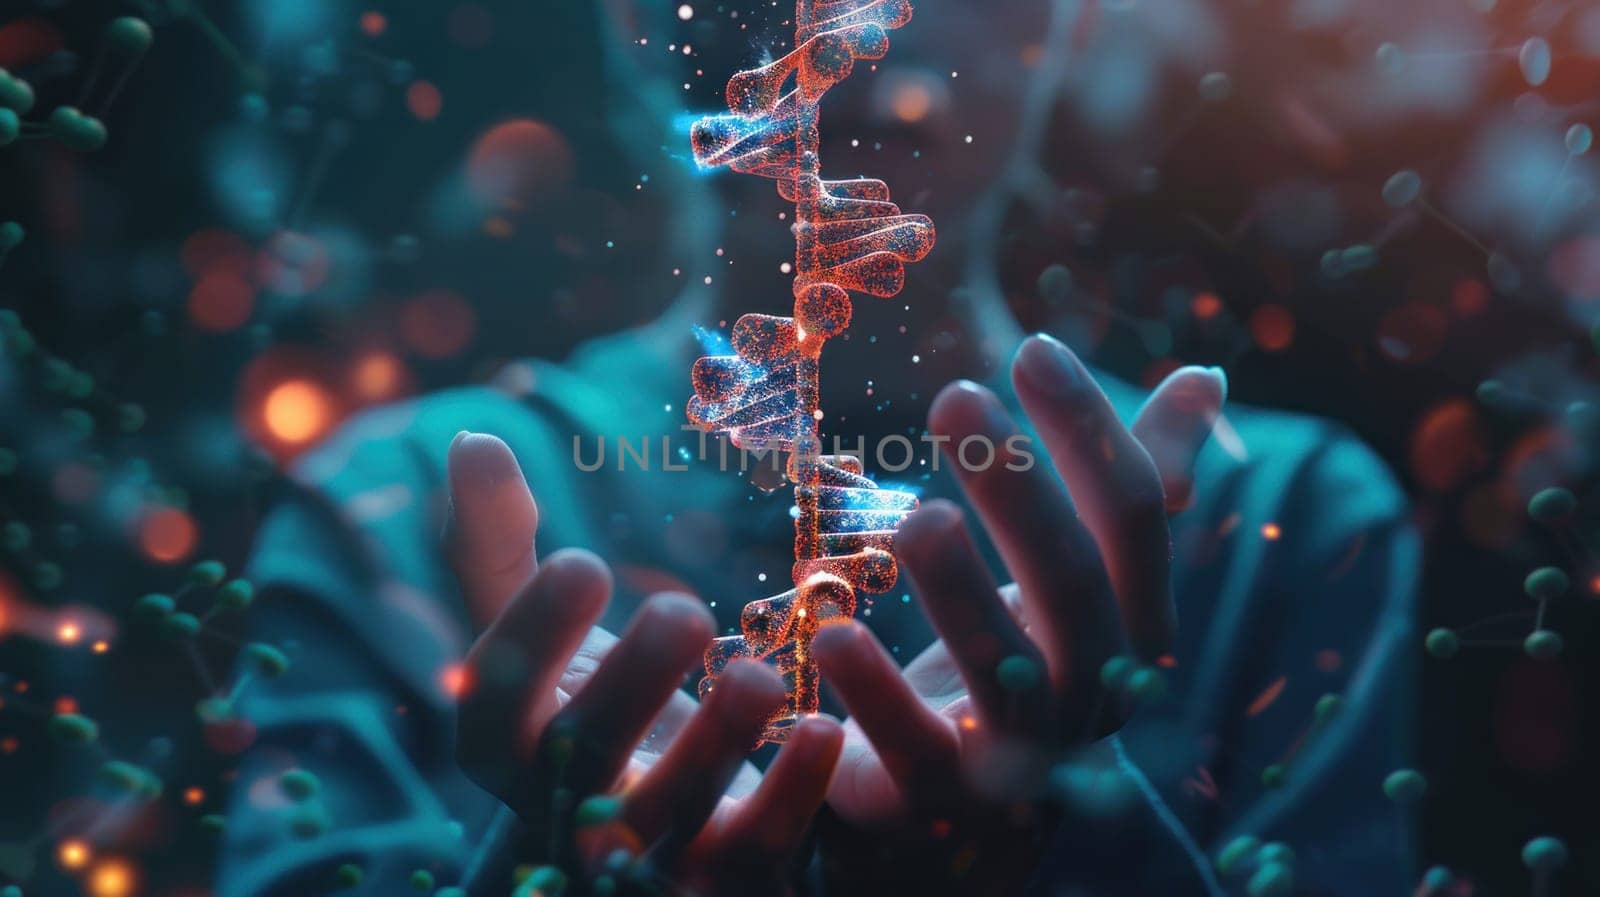 A person is holding a DNA strand in their hands by golfmerrymaker